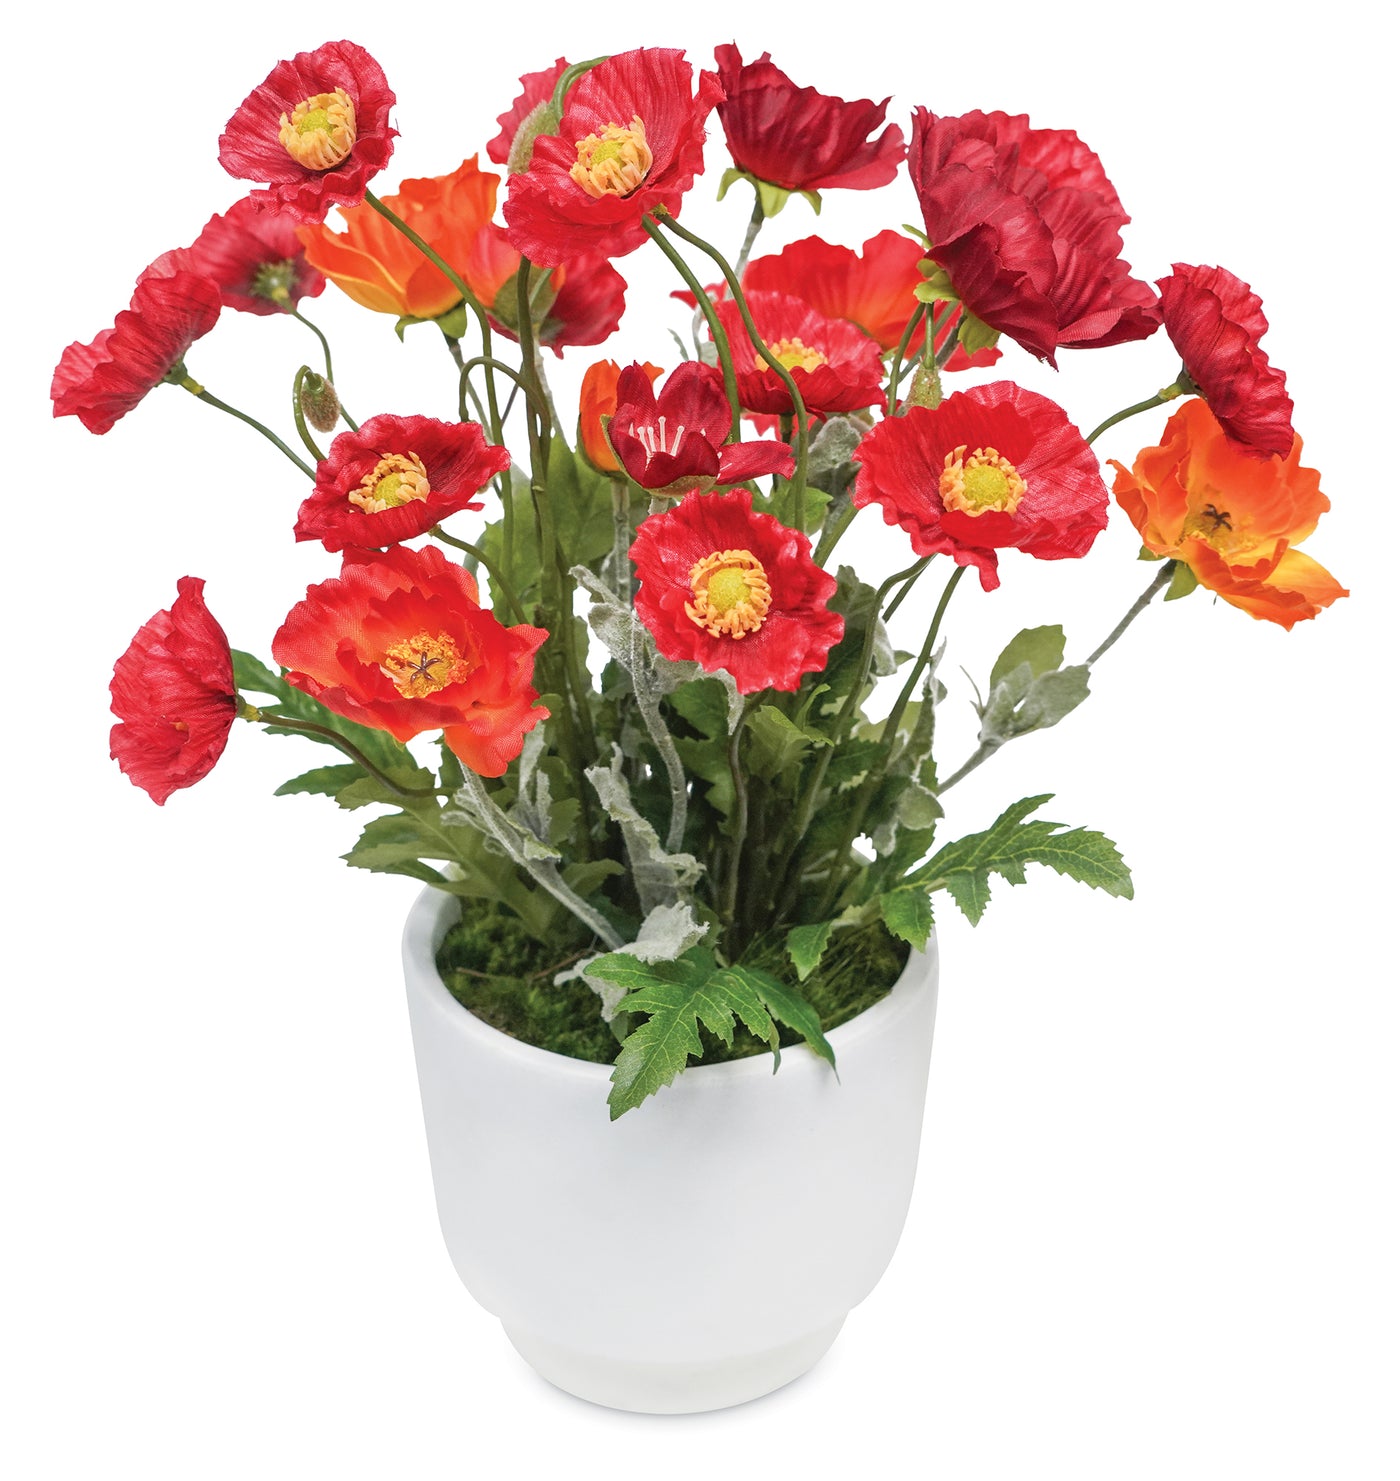 Poppies Bouquet in a White Pot